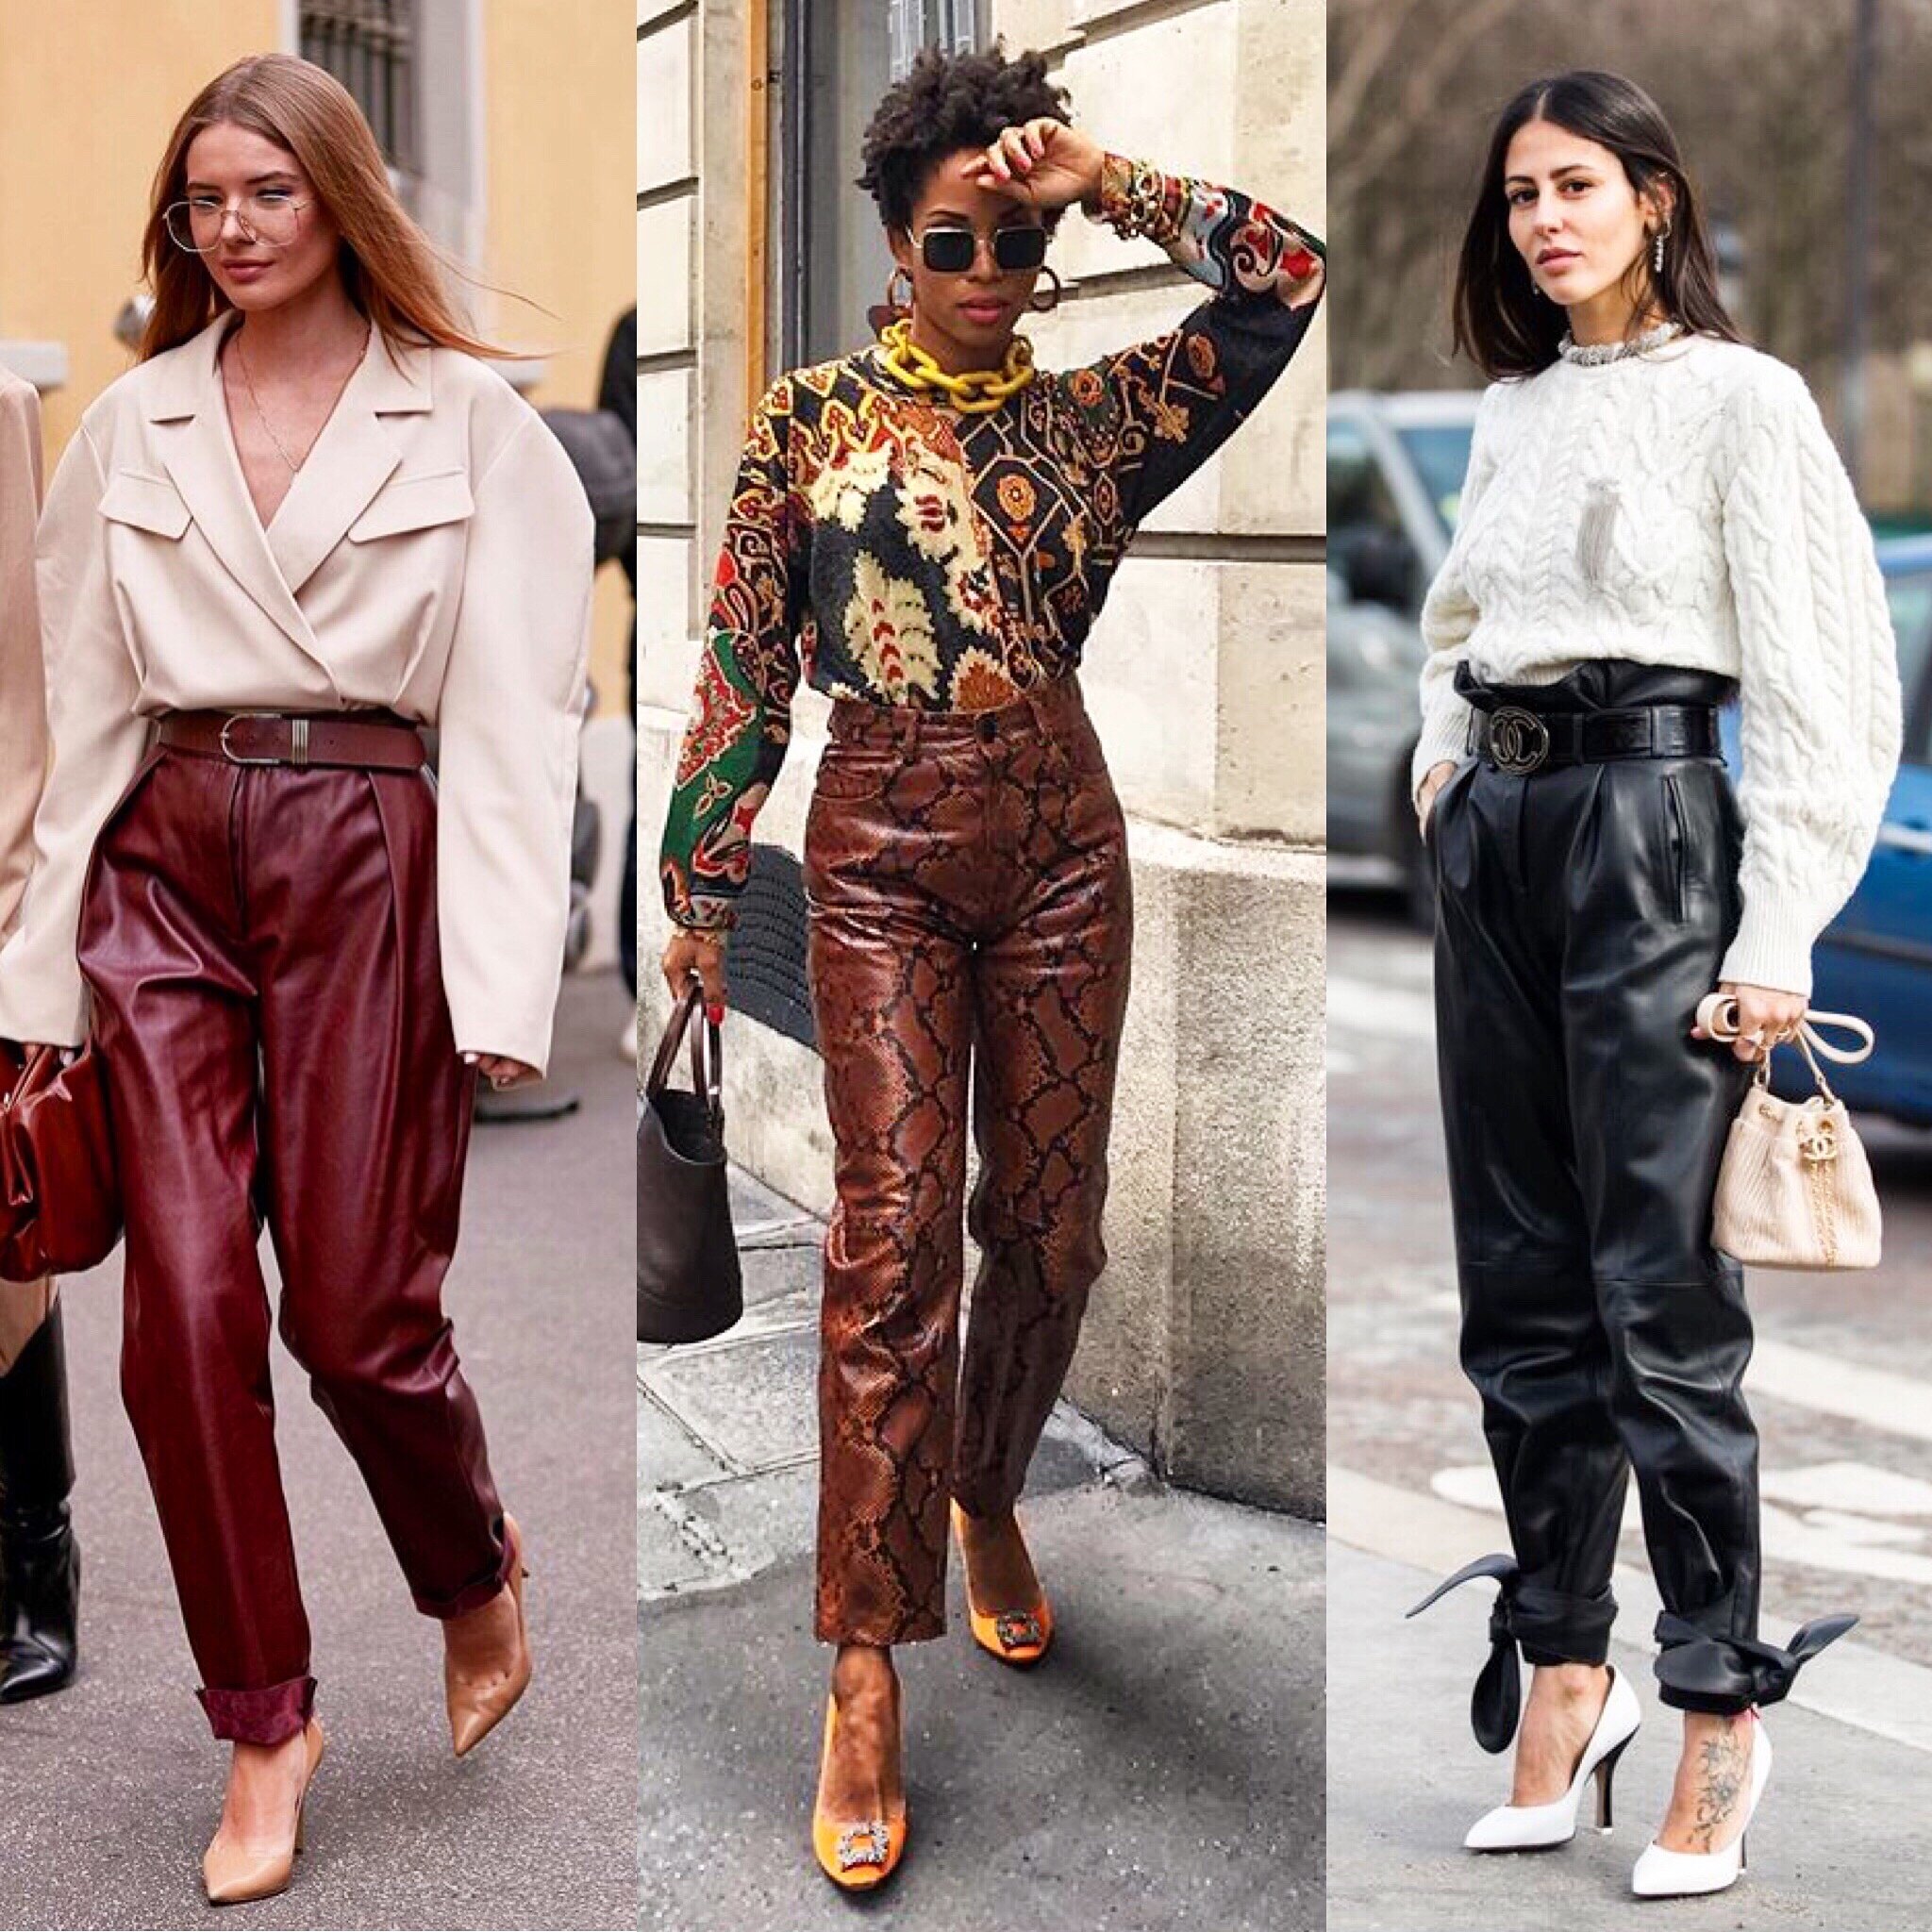   &nbsp;In the early 2000s, leather pants usually meant skin-tight, low LOW rise and unflattering on at least 97 % of the population. Luckily, almost two decades later we’ve righted our wrongs and chic leather pants finally exist. Each of these looks